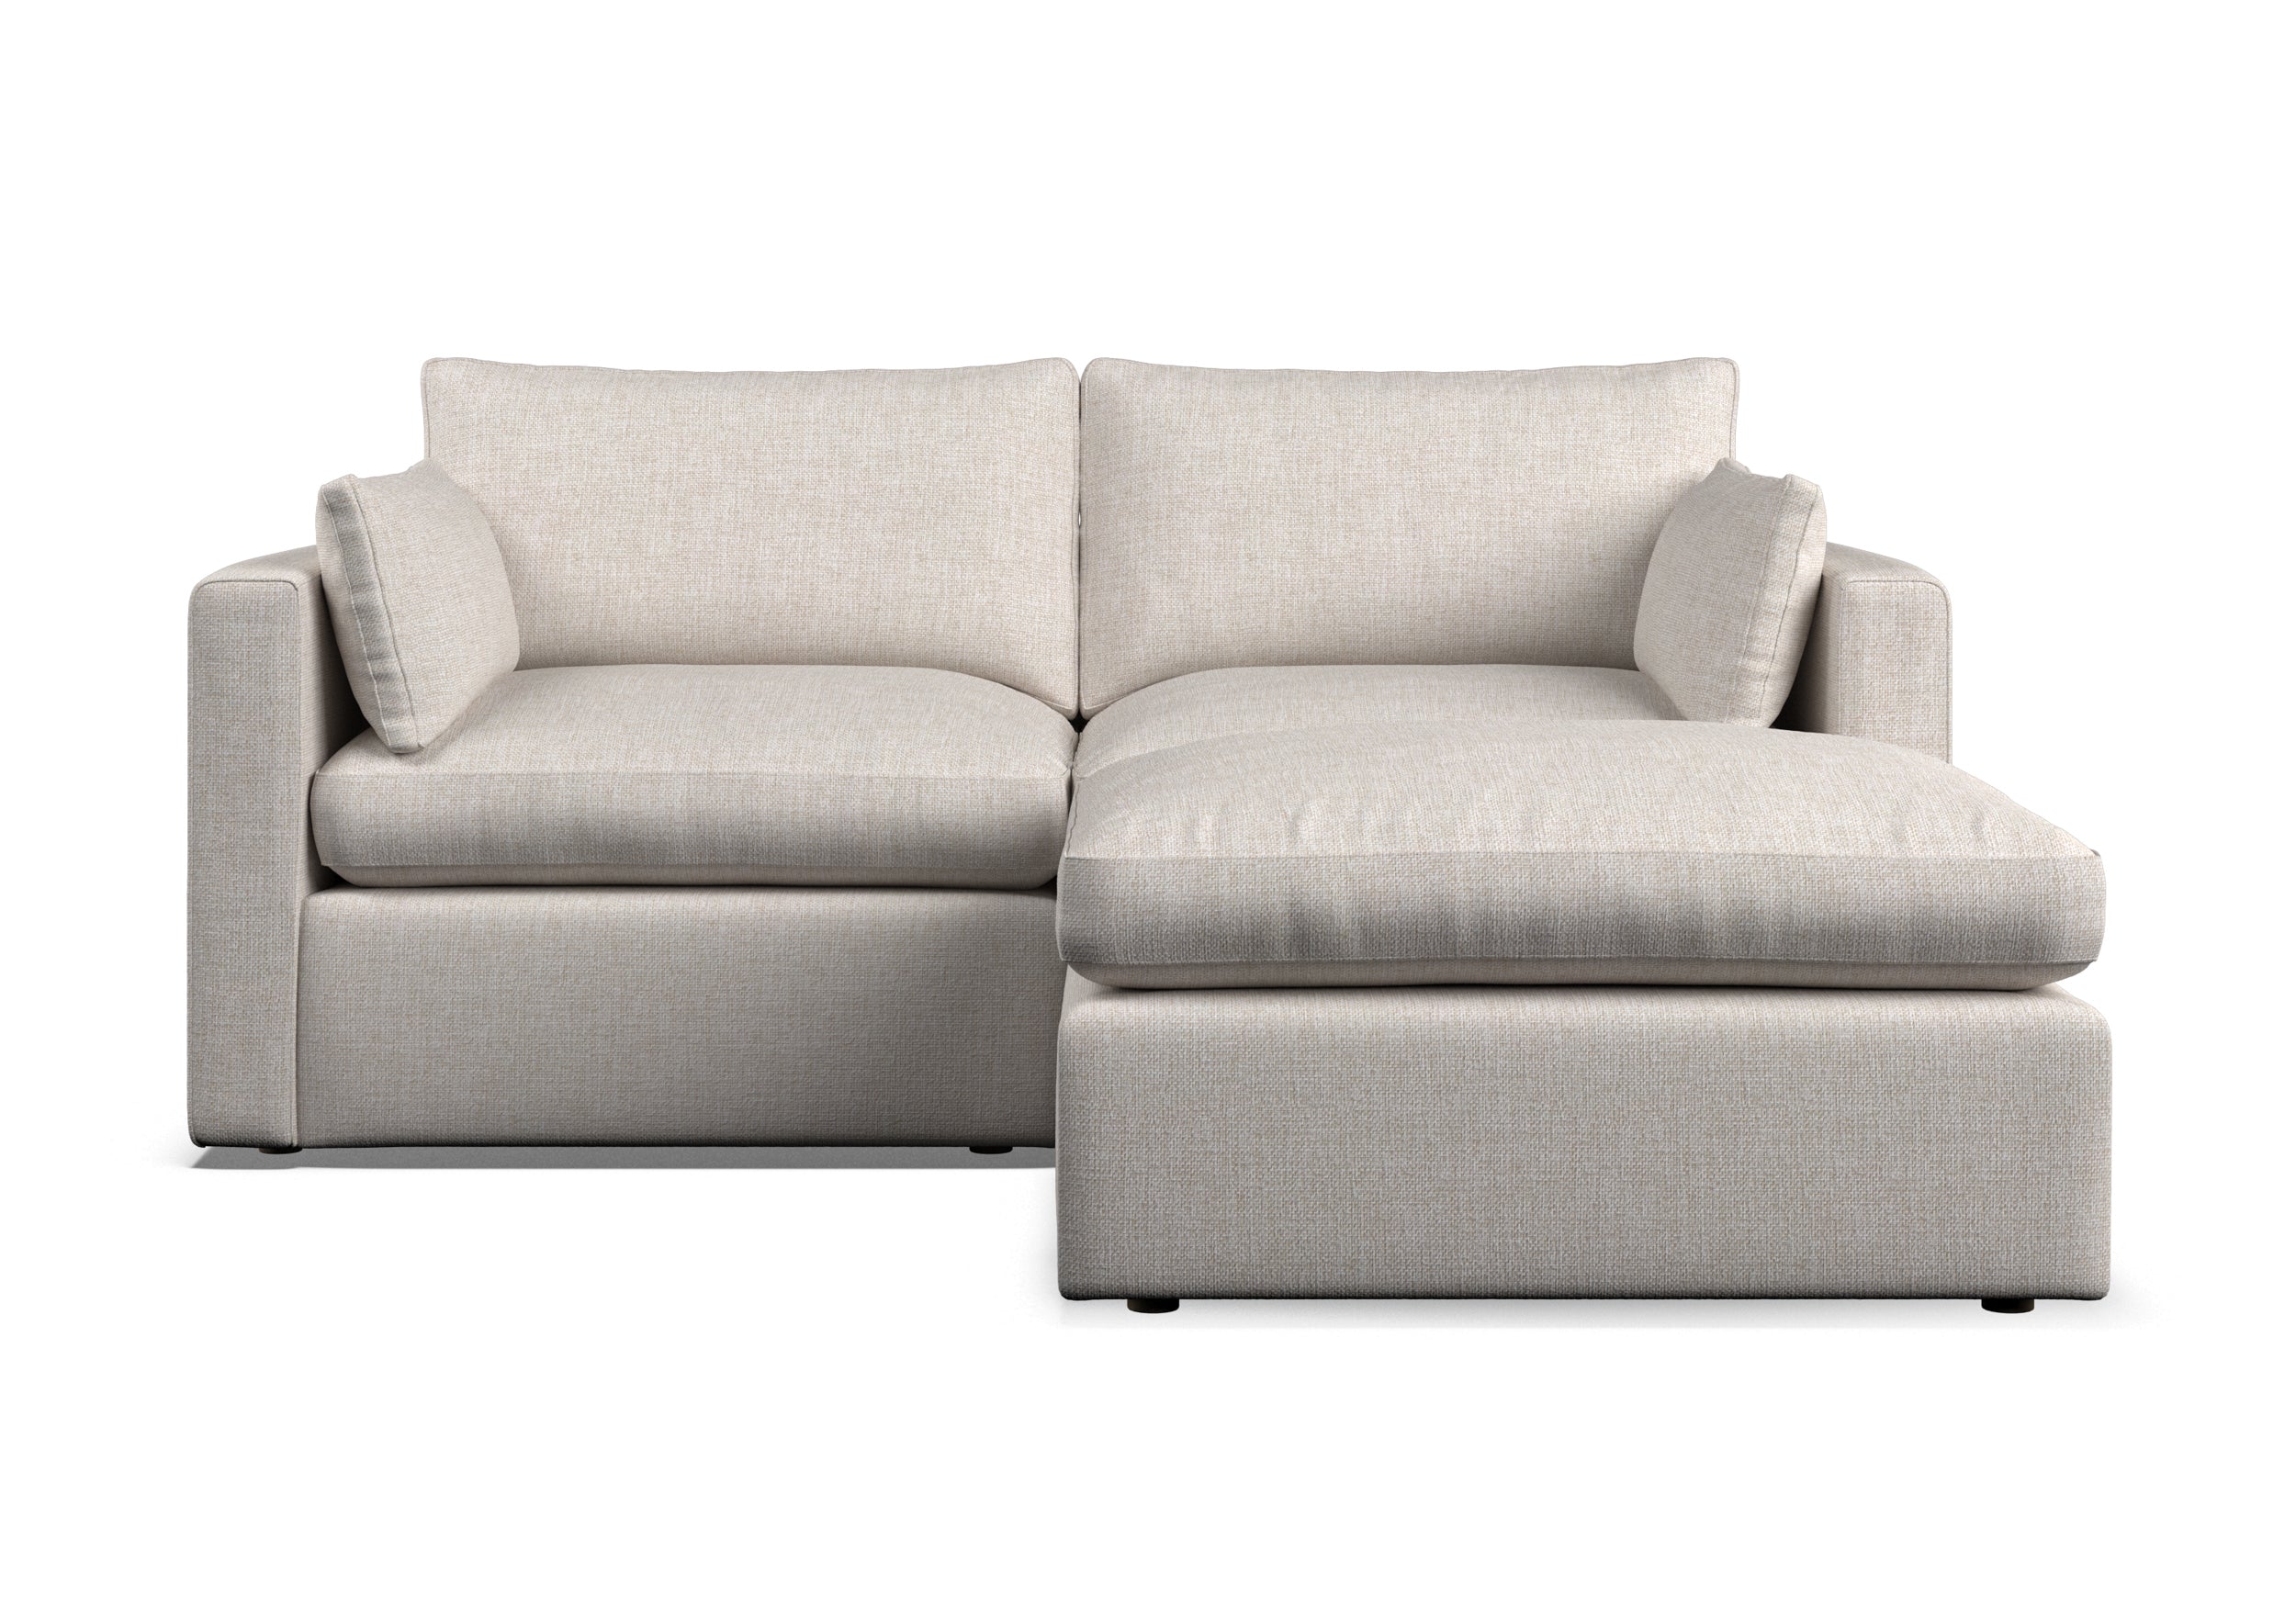 Soulmate Right Arm 3 Piece Modular Chaise Sofa